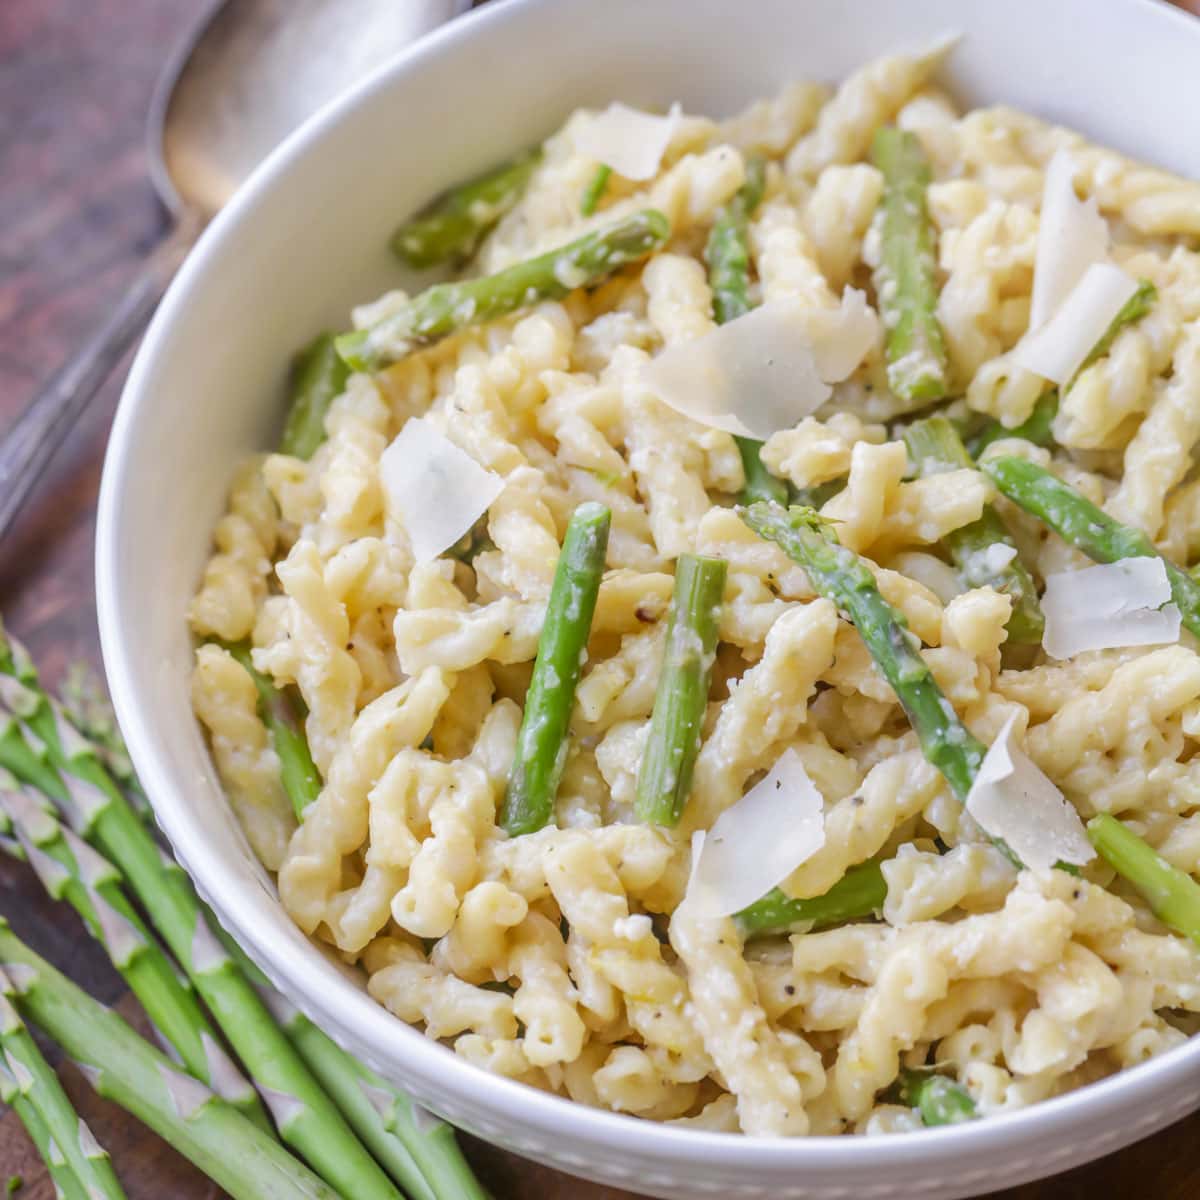 Healthy Pasta Recipes - Lemon Asparagus Pasta in a white bowl topped with parmesan shavings.